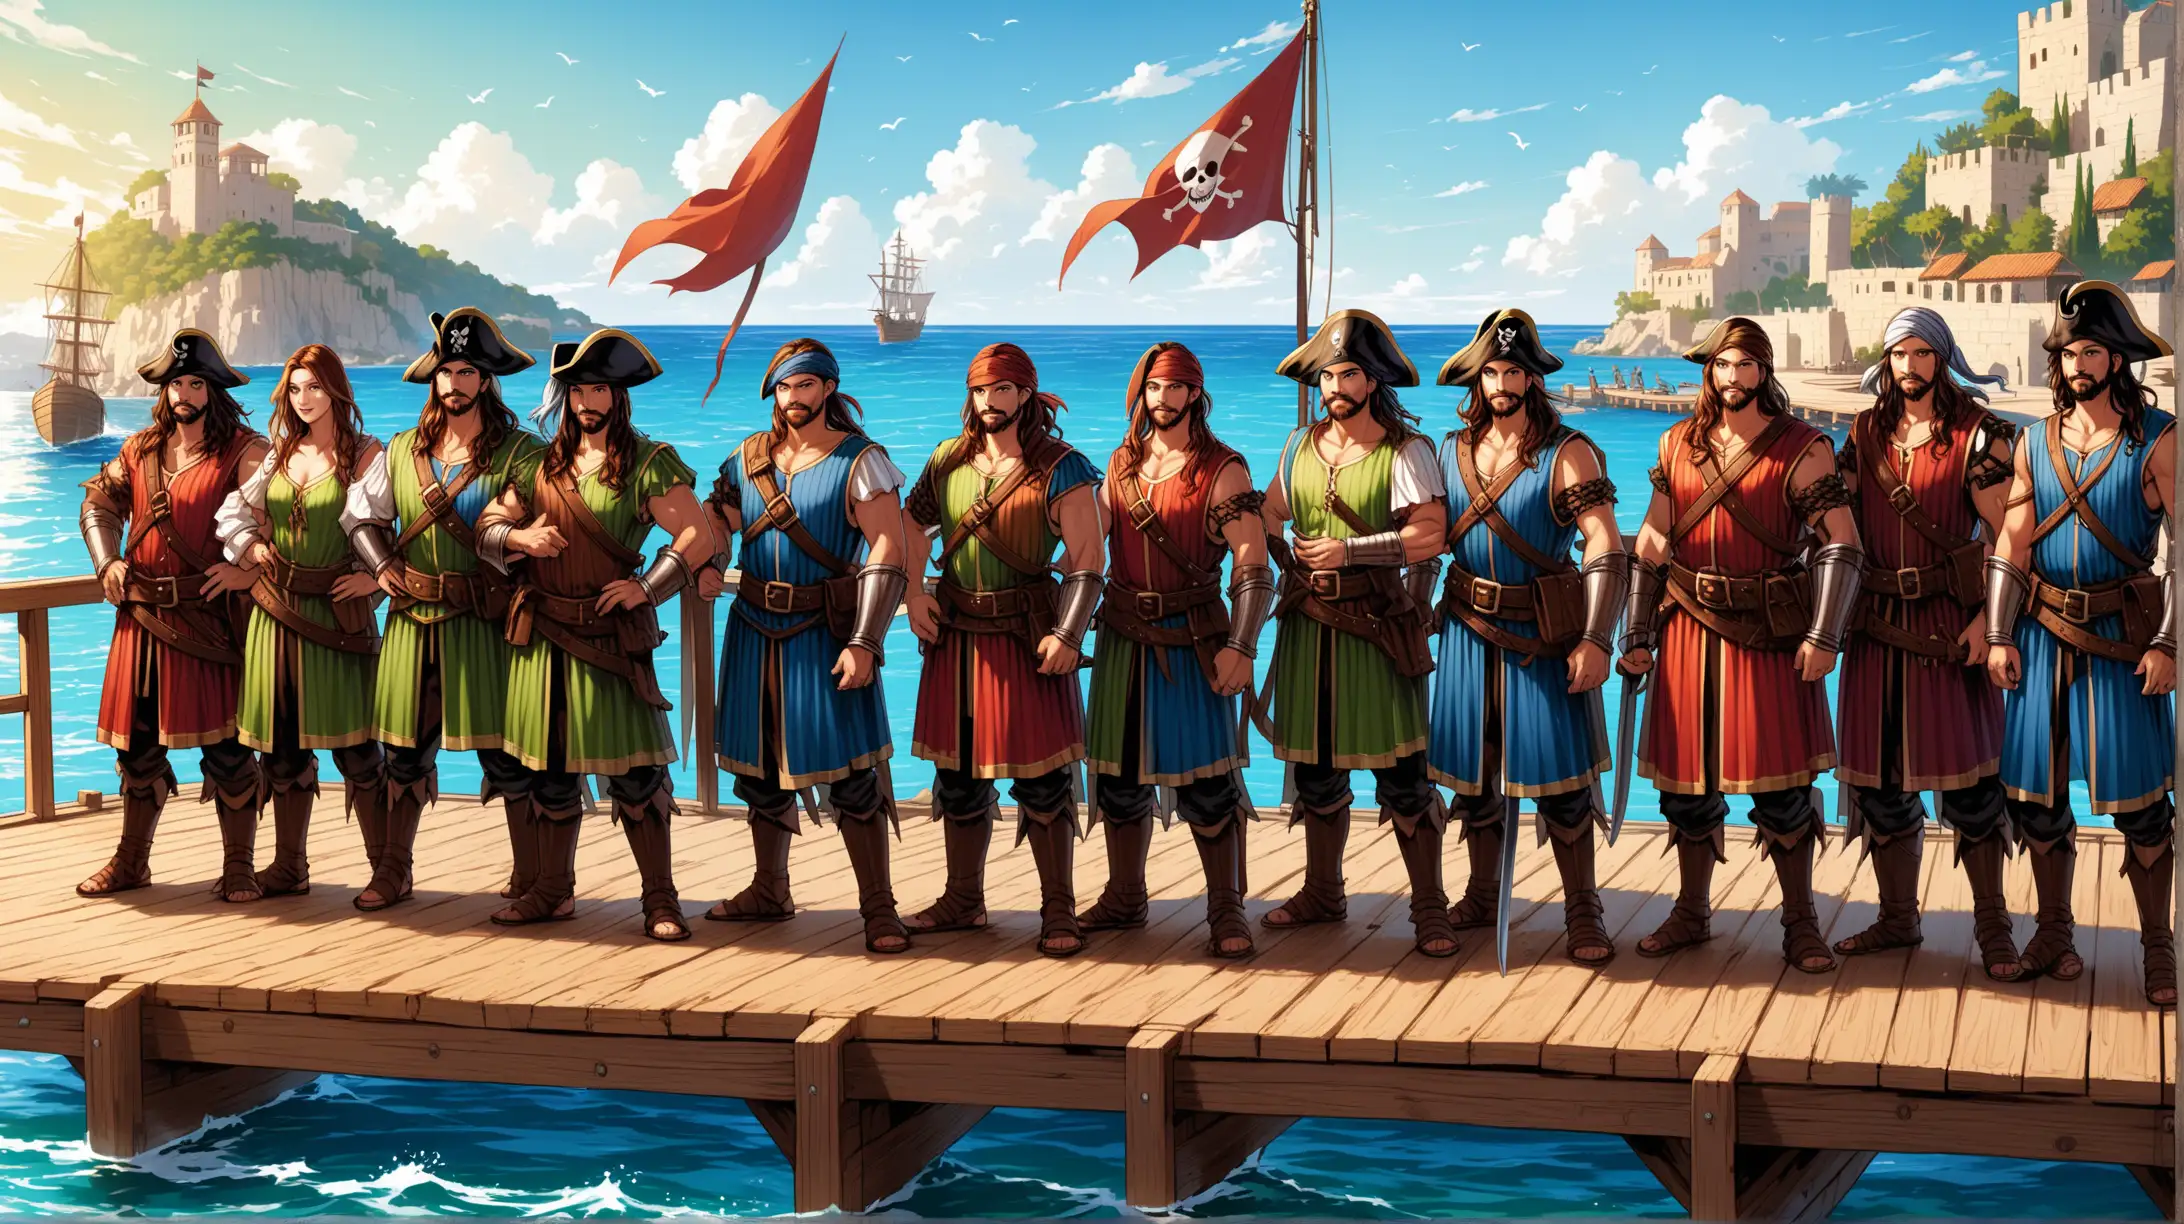 line-up crew of pirates gladiators and wizards, men and women, Mediterranean, wooden dock, Medieval fantasy